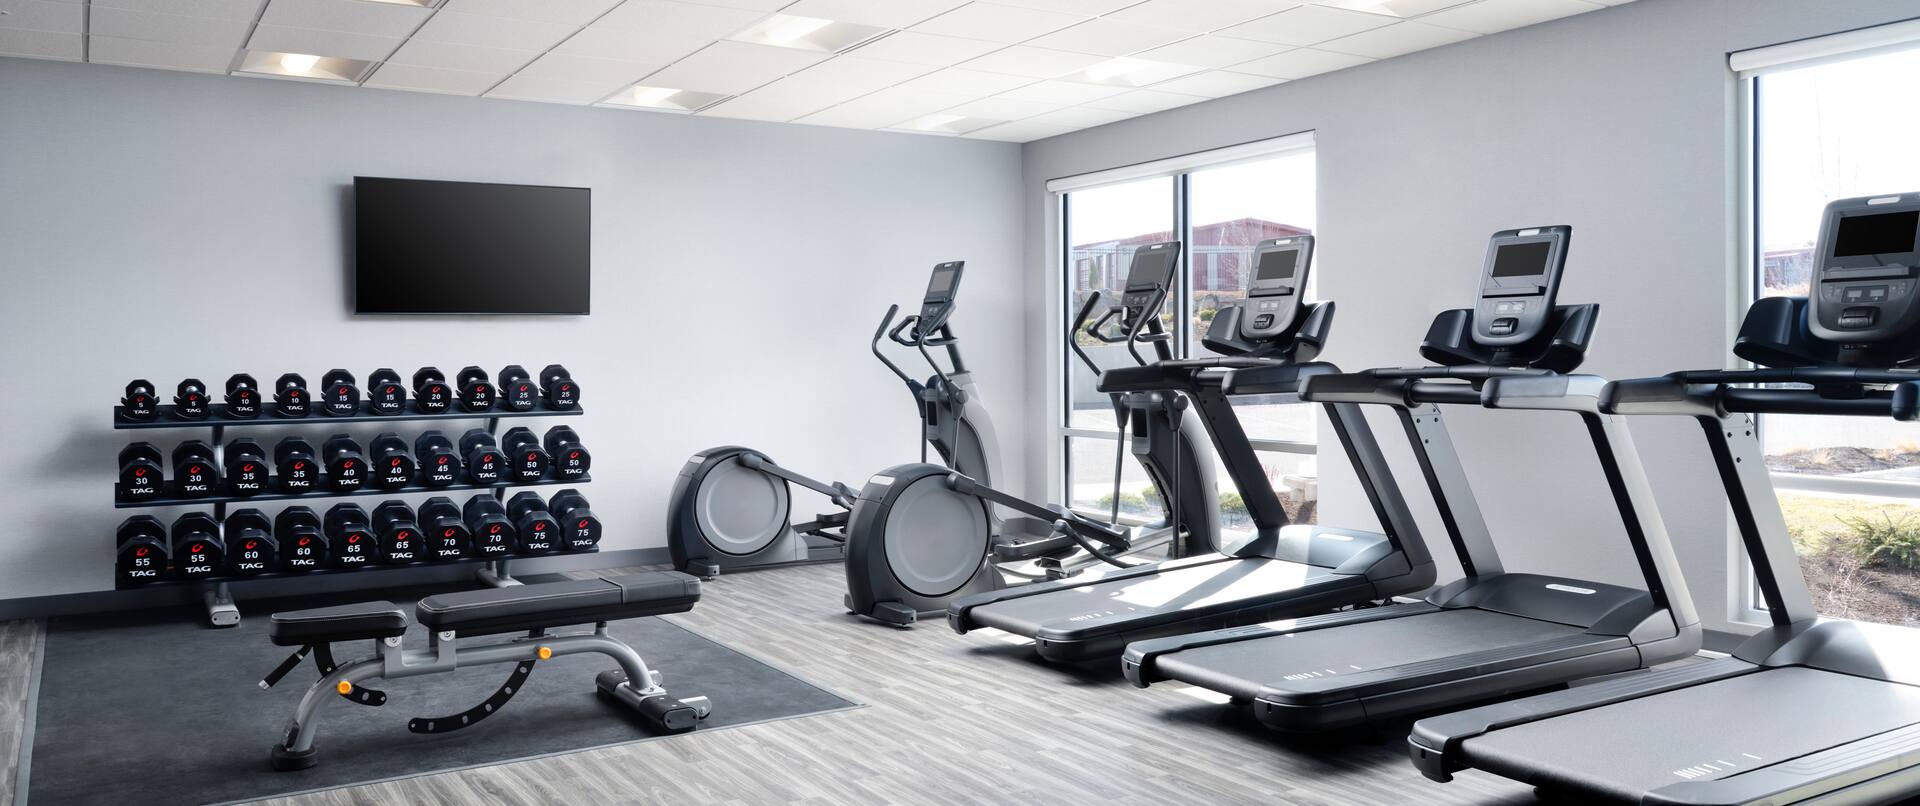 Fitness Center with Treadmills Recumbent Bikes Weights and HDTV